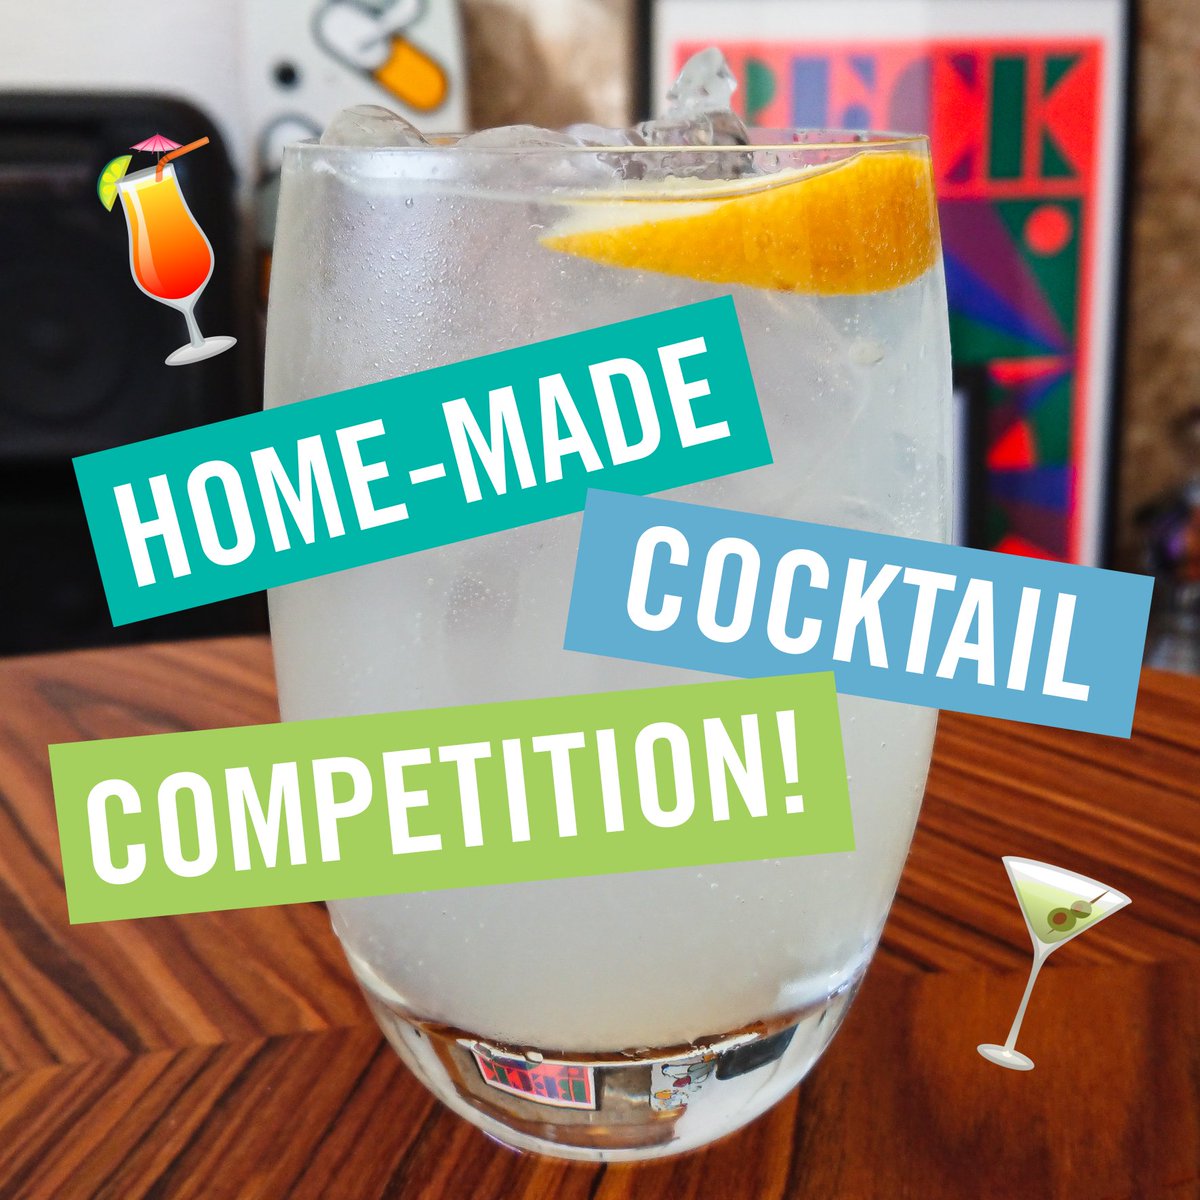 Who wants to win a FREE BOTTLE OF GIN!? Enter our home-made cocktail competition to be in with a chance of winning! The rules are simple - check the thread for all the details!